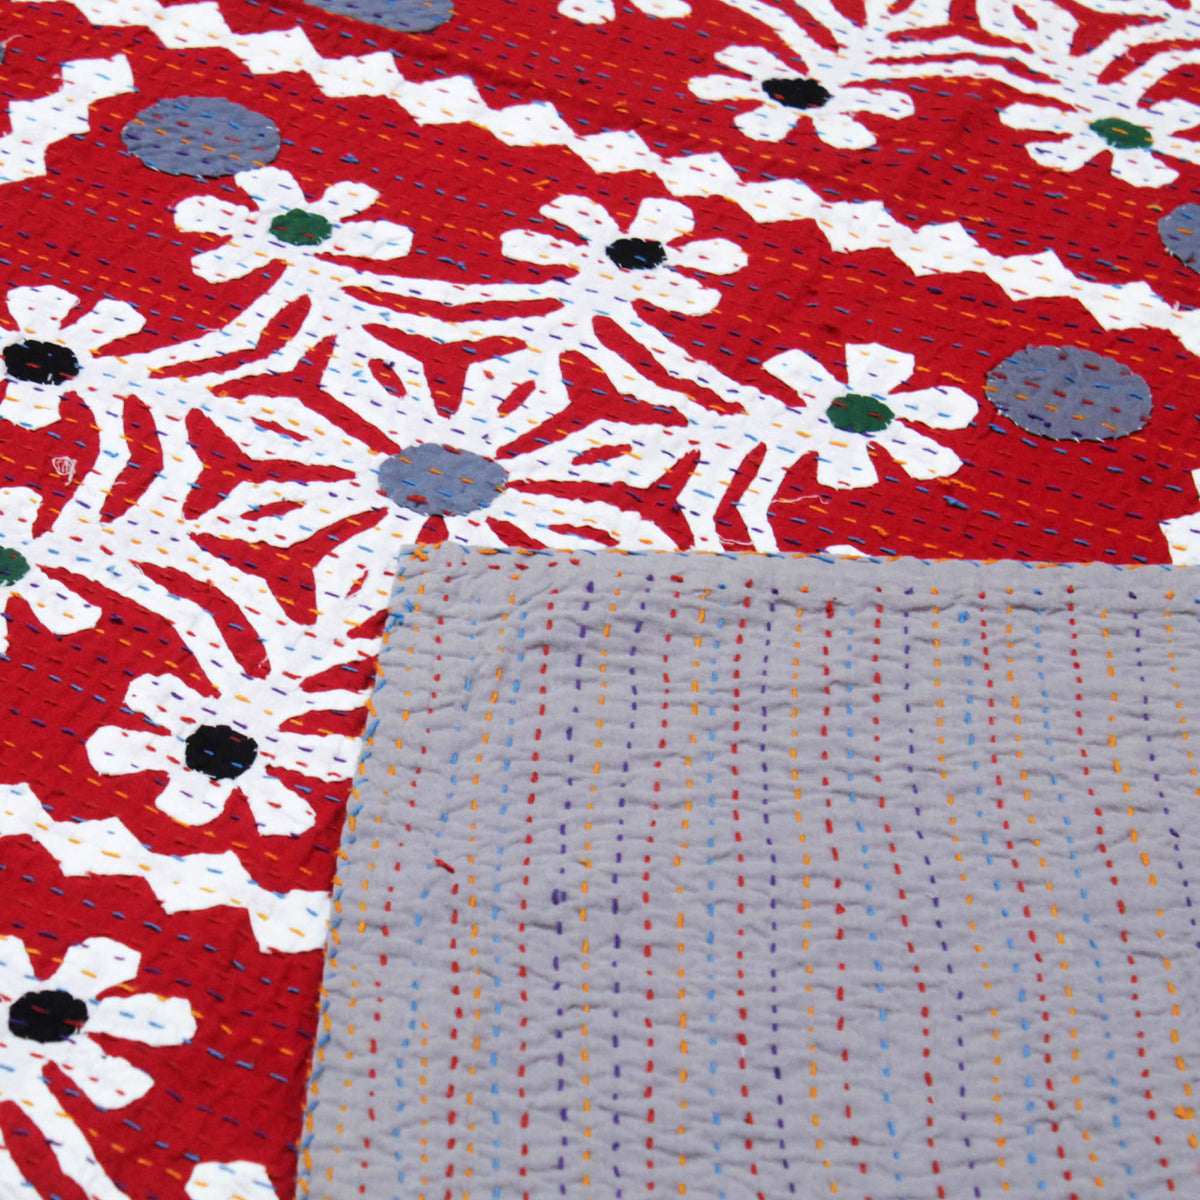 Red & White Snowflake Indian Applique Cutwork Kantha Embroidered Applique Bedspread,Queen Size